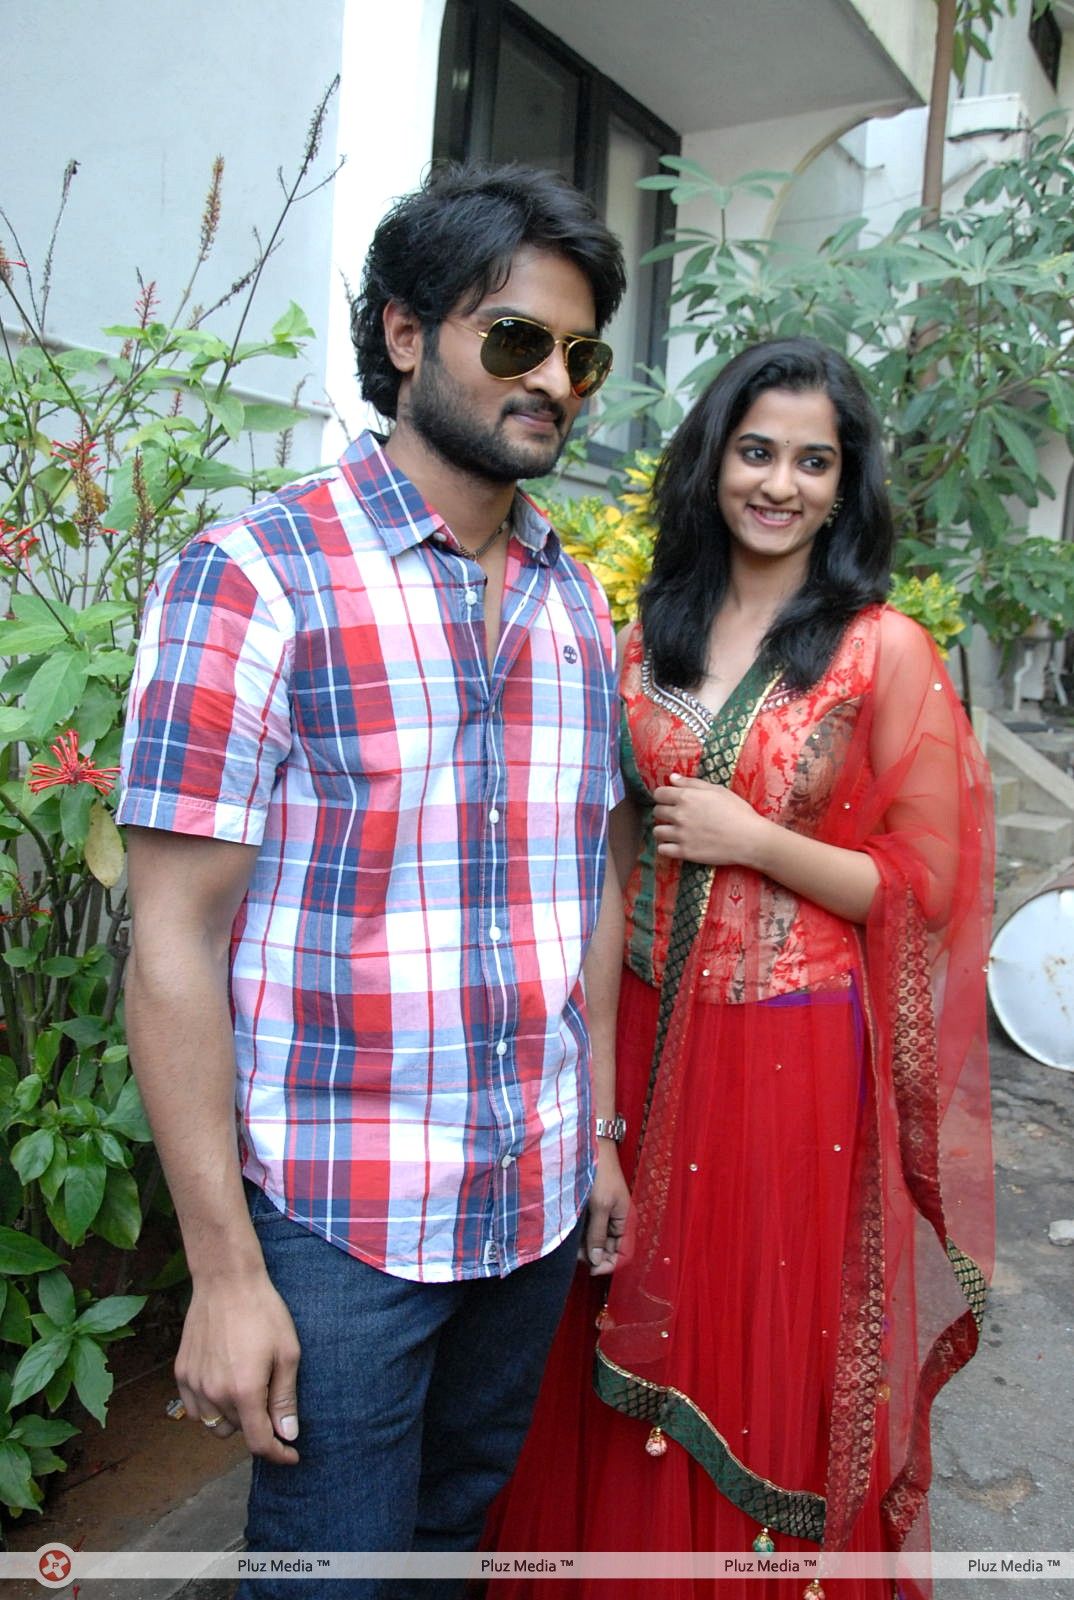 Premakatha Chitram Movie Opening Photos | Picture 317422